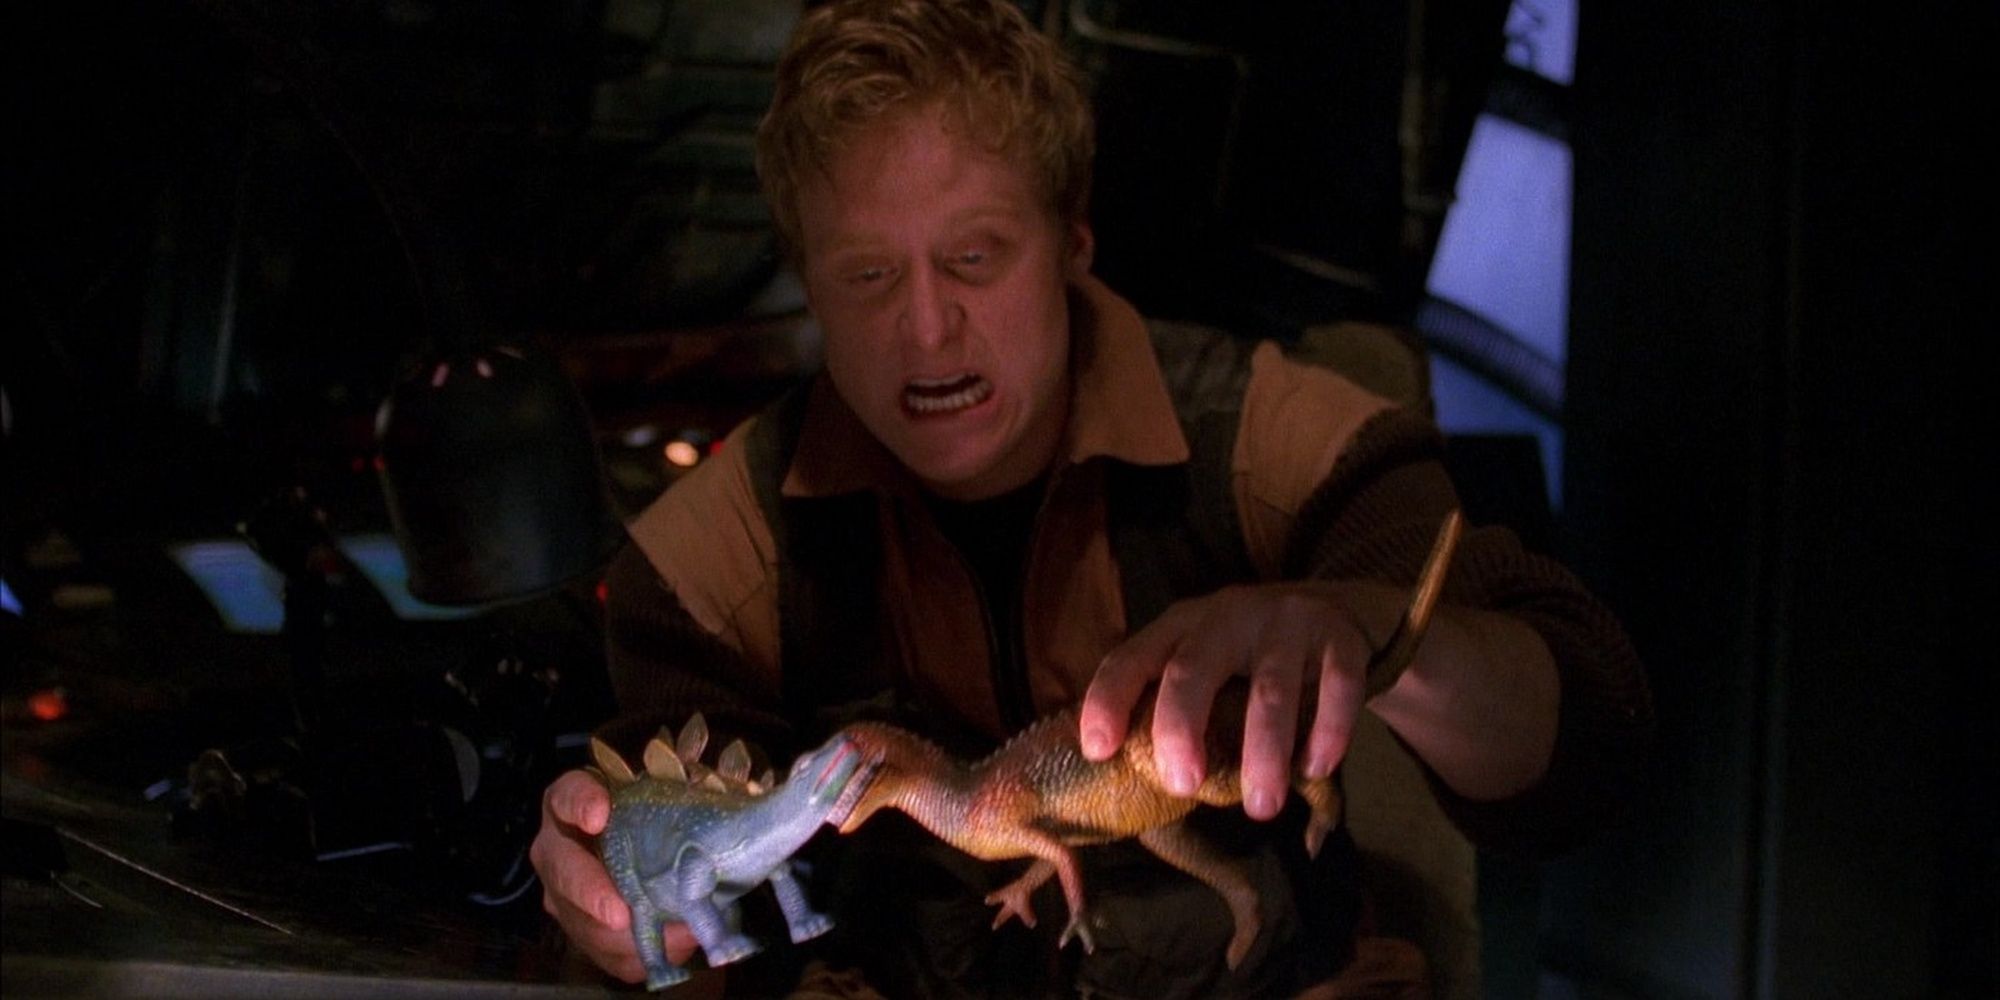 A man playing with toy dinosaurs